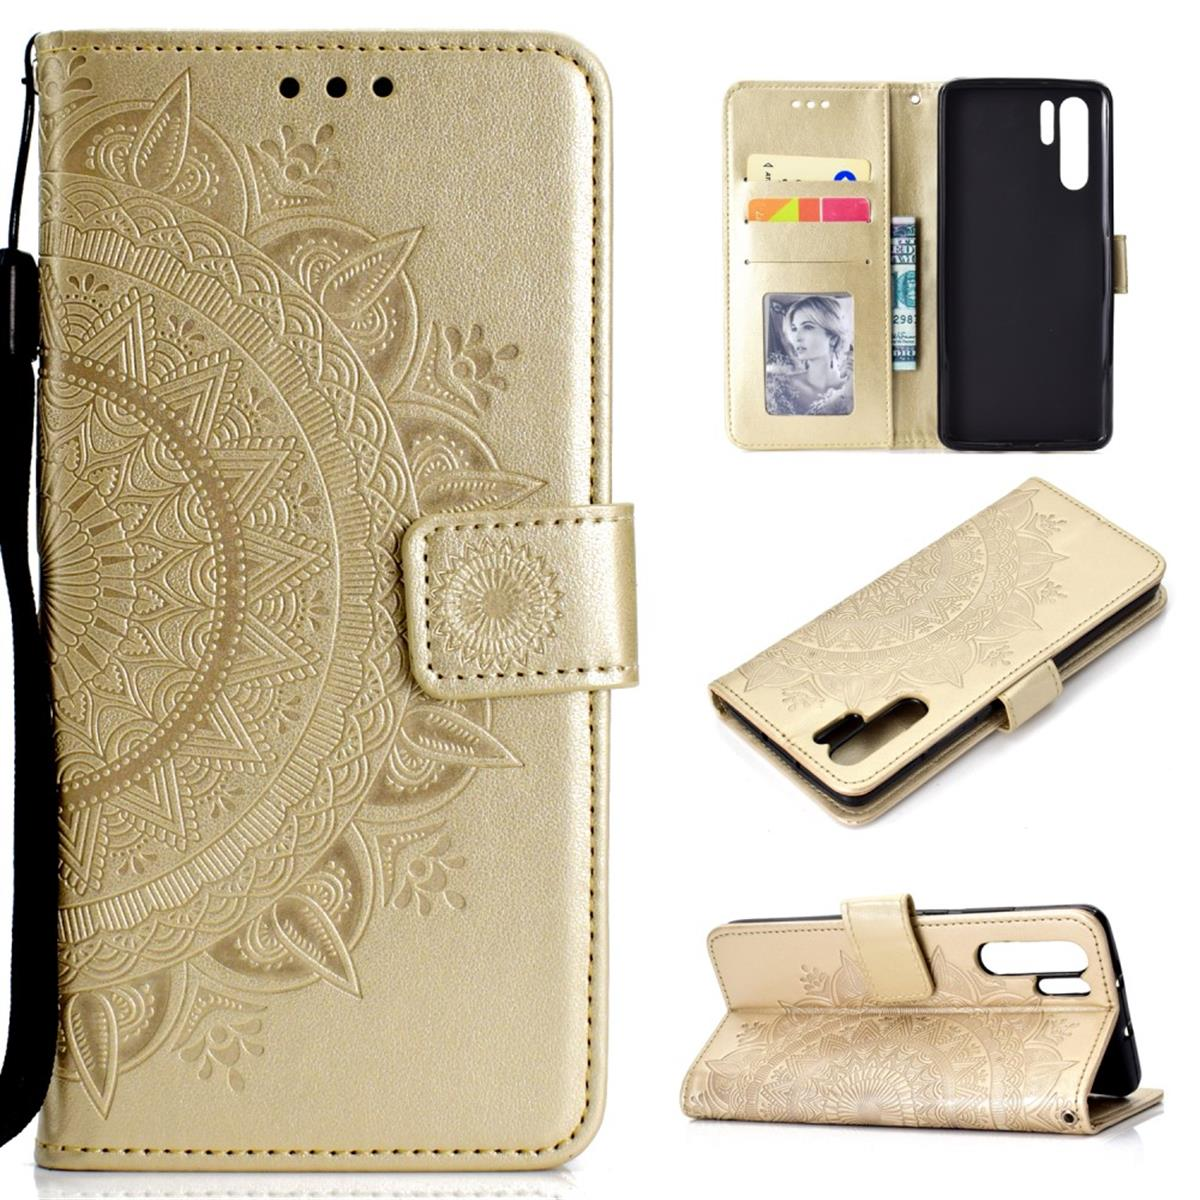 mit Muster, P30 COVERKINGZ Pro, Klapphülle Bookcover, Huawei, Mandala Gold